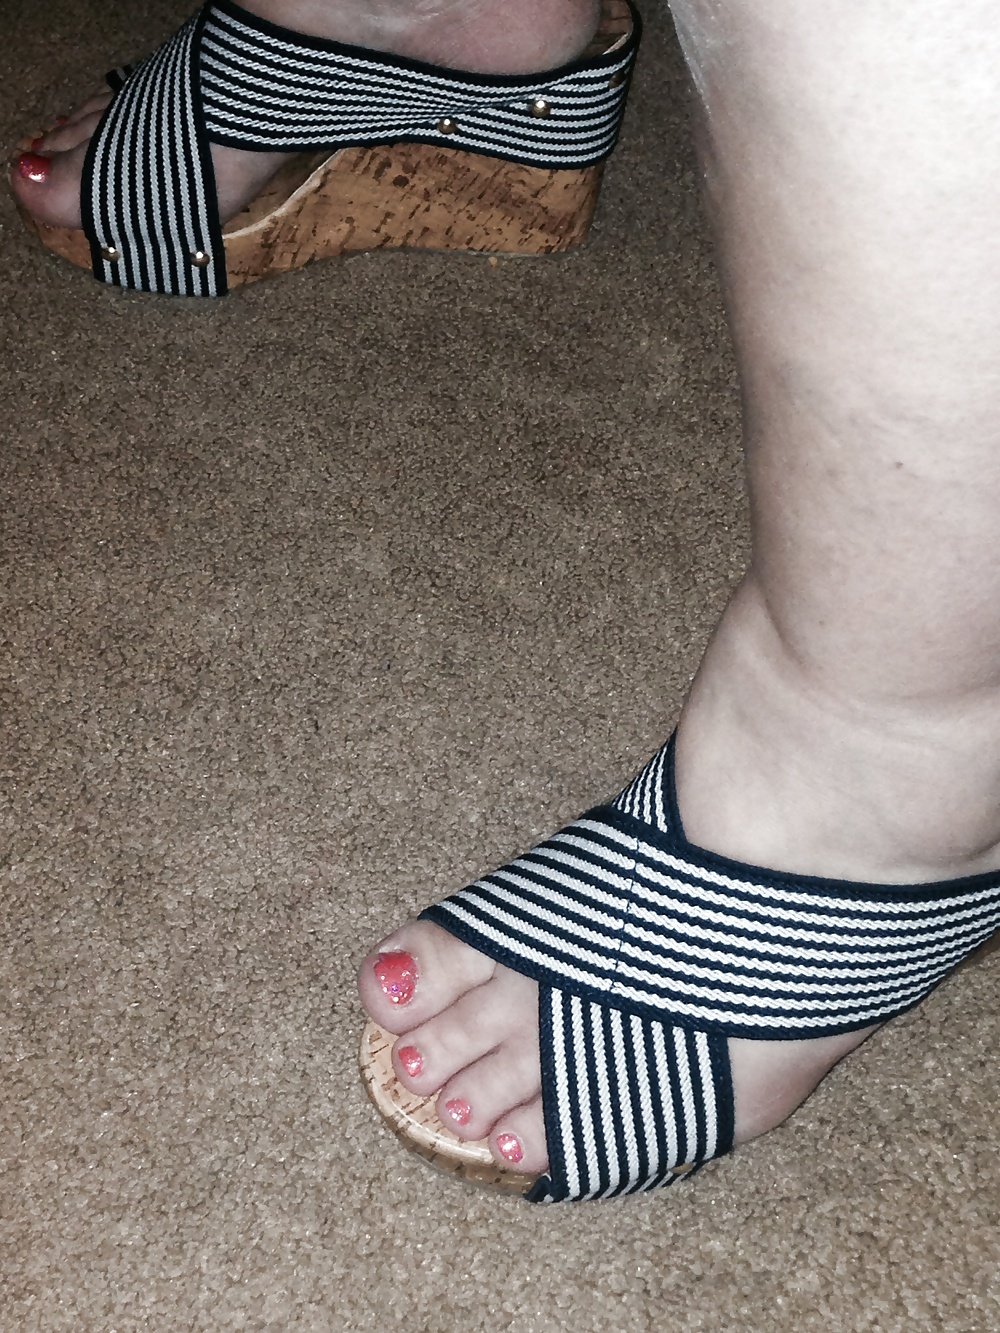 Wifey's Sexy Pink Toes in Wedges  #31763868